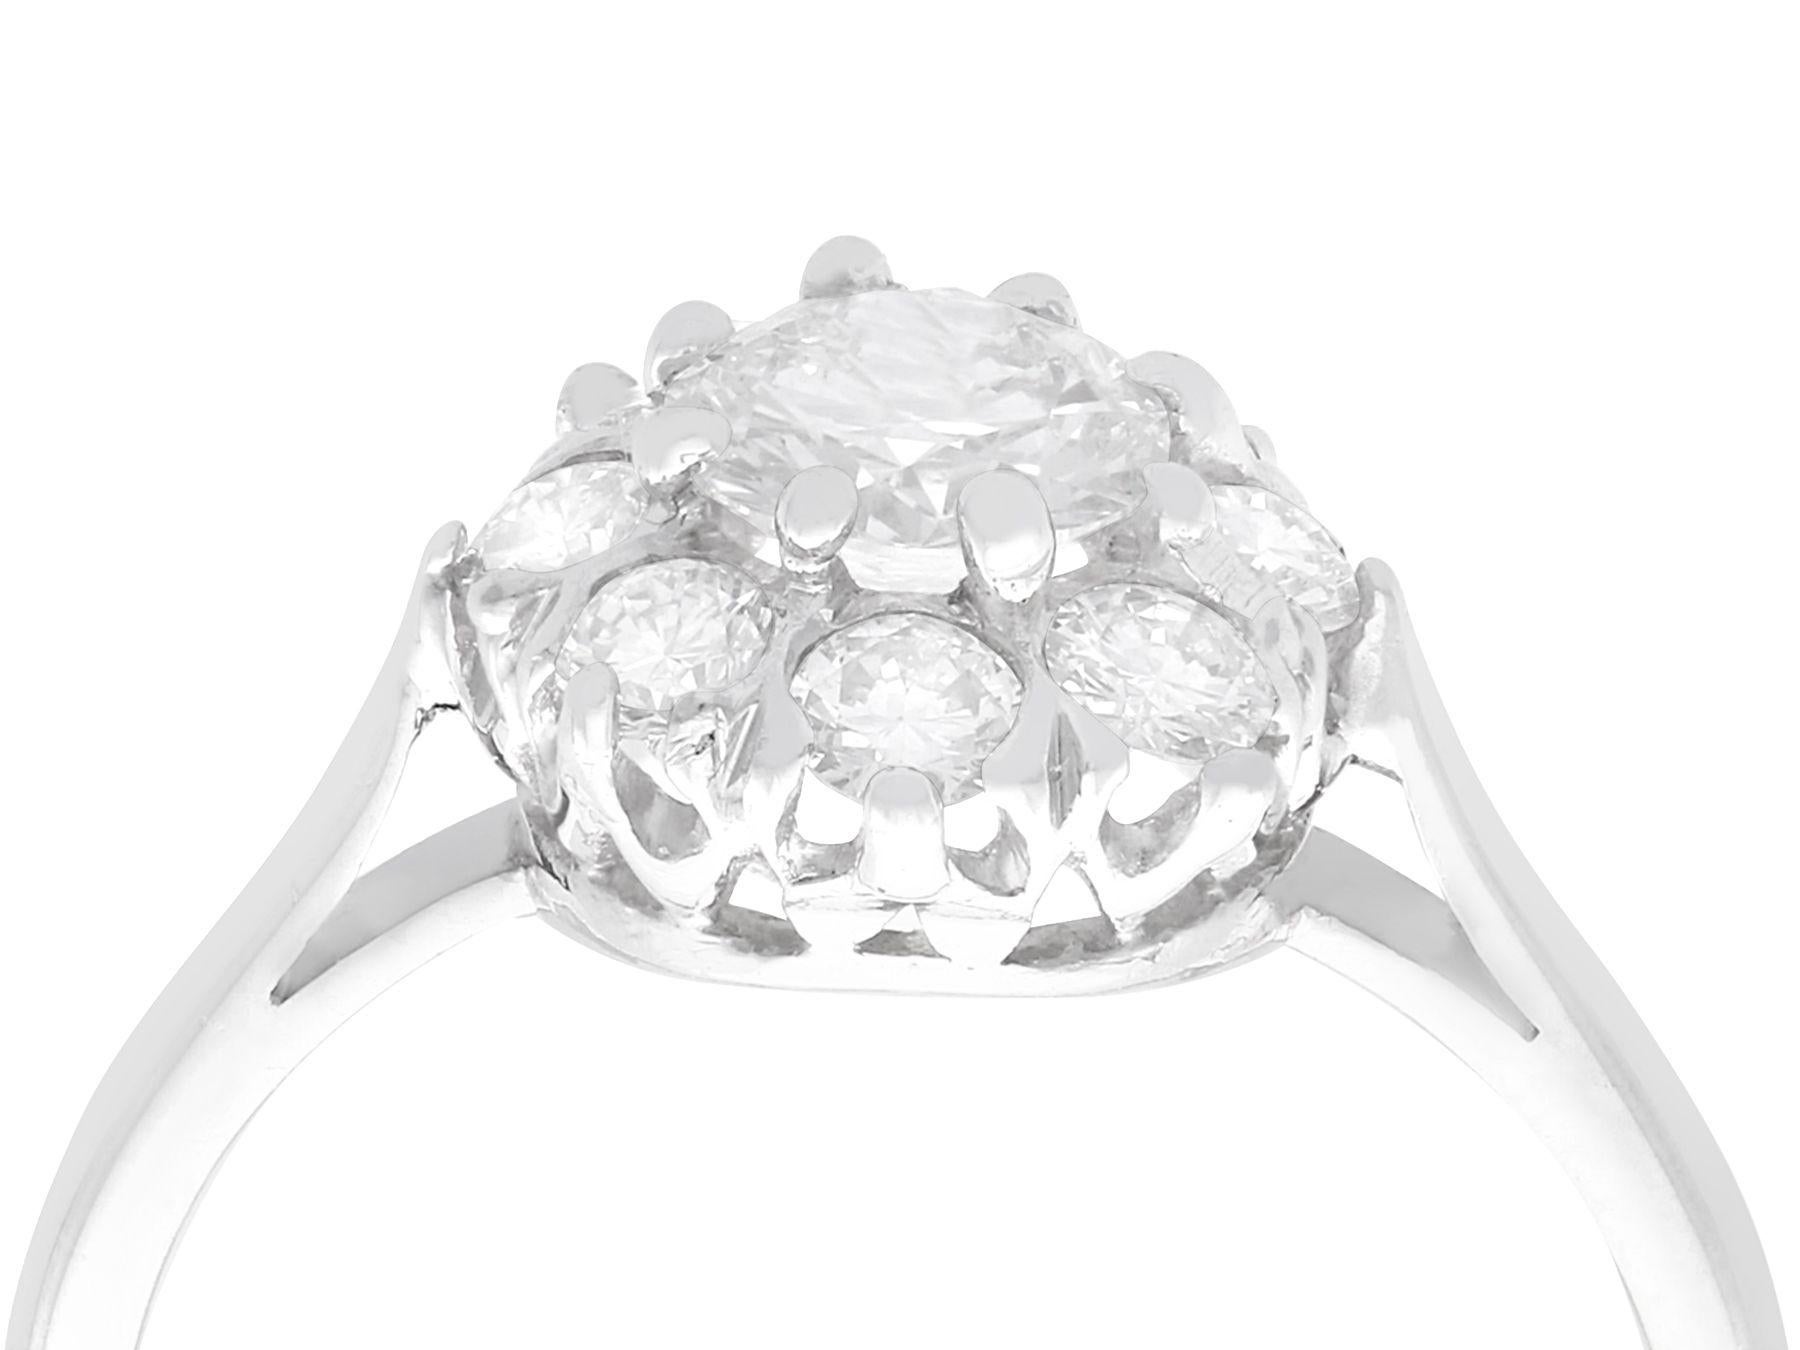 A stunning, fine and impressive vintage 1.14 carat diamond and platinum cluster ring; part of our diamond jewelry collections.

This stunning vintage diamond cluster ring has been crafted in platinum.

The pierced decorated frame displays a stunning